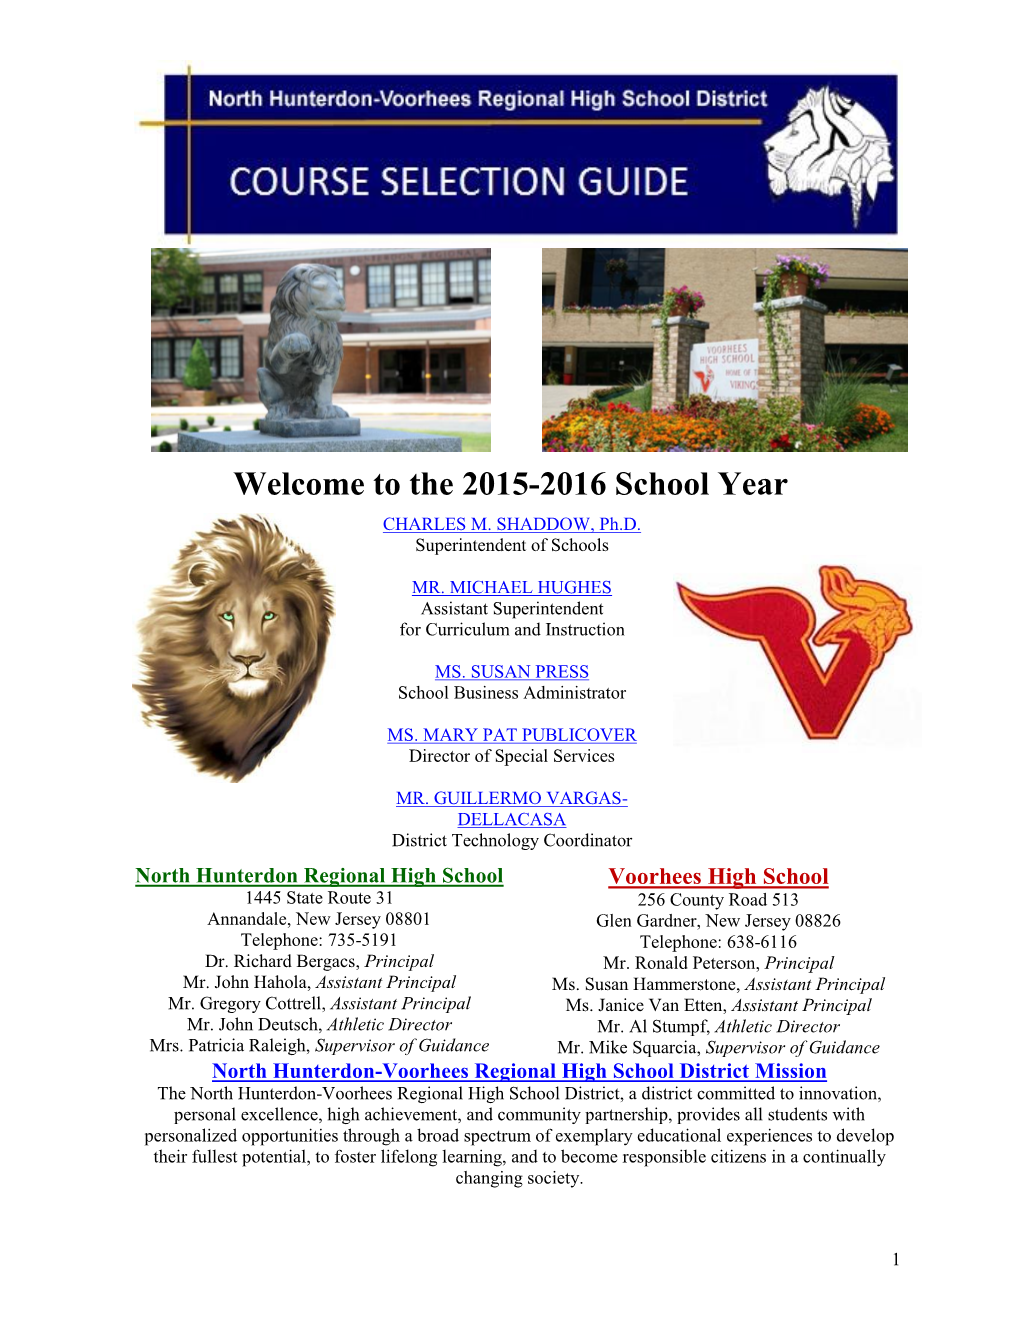 2015-2016 Course Selection Guide